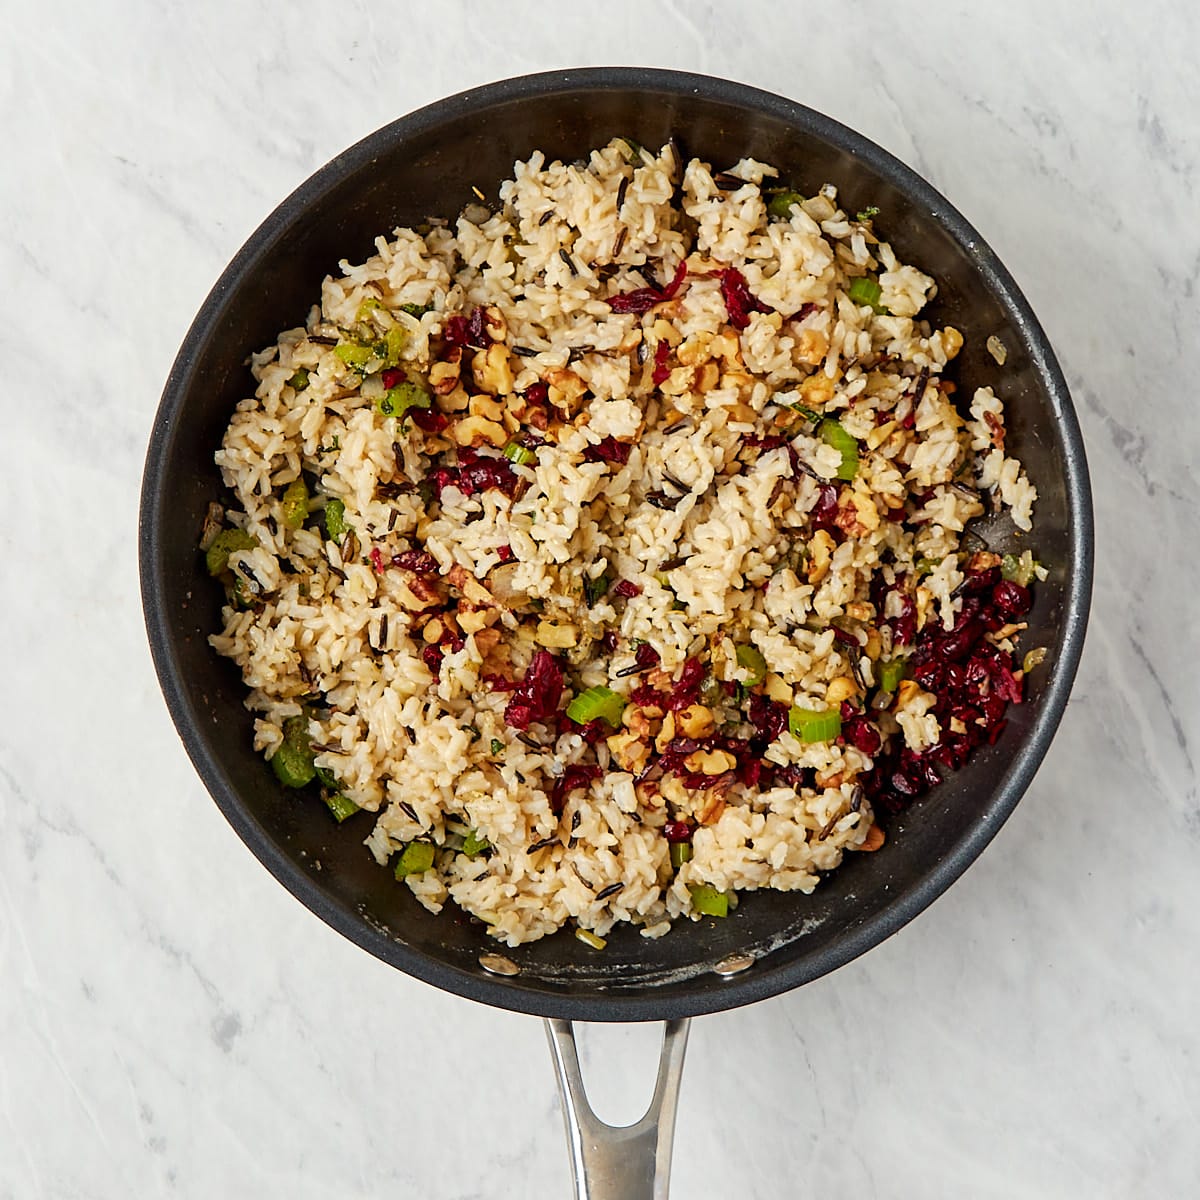 cooked rice, walnuts, and cranberries added to skillet with onions, celery, and herbs.